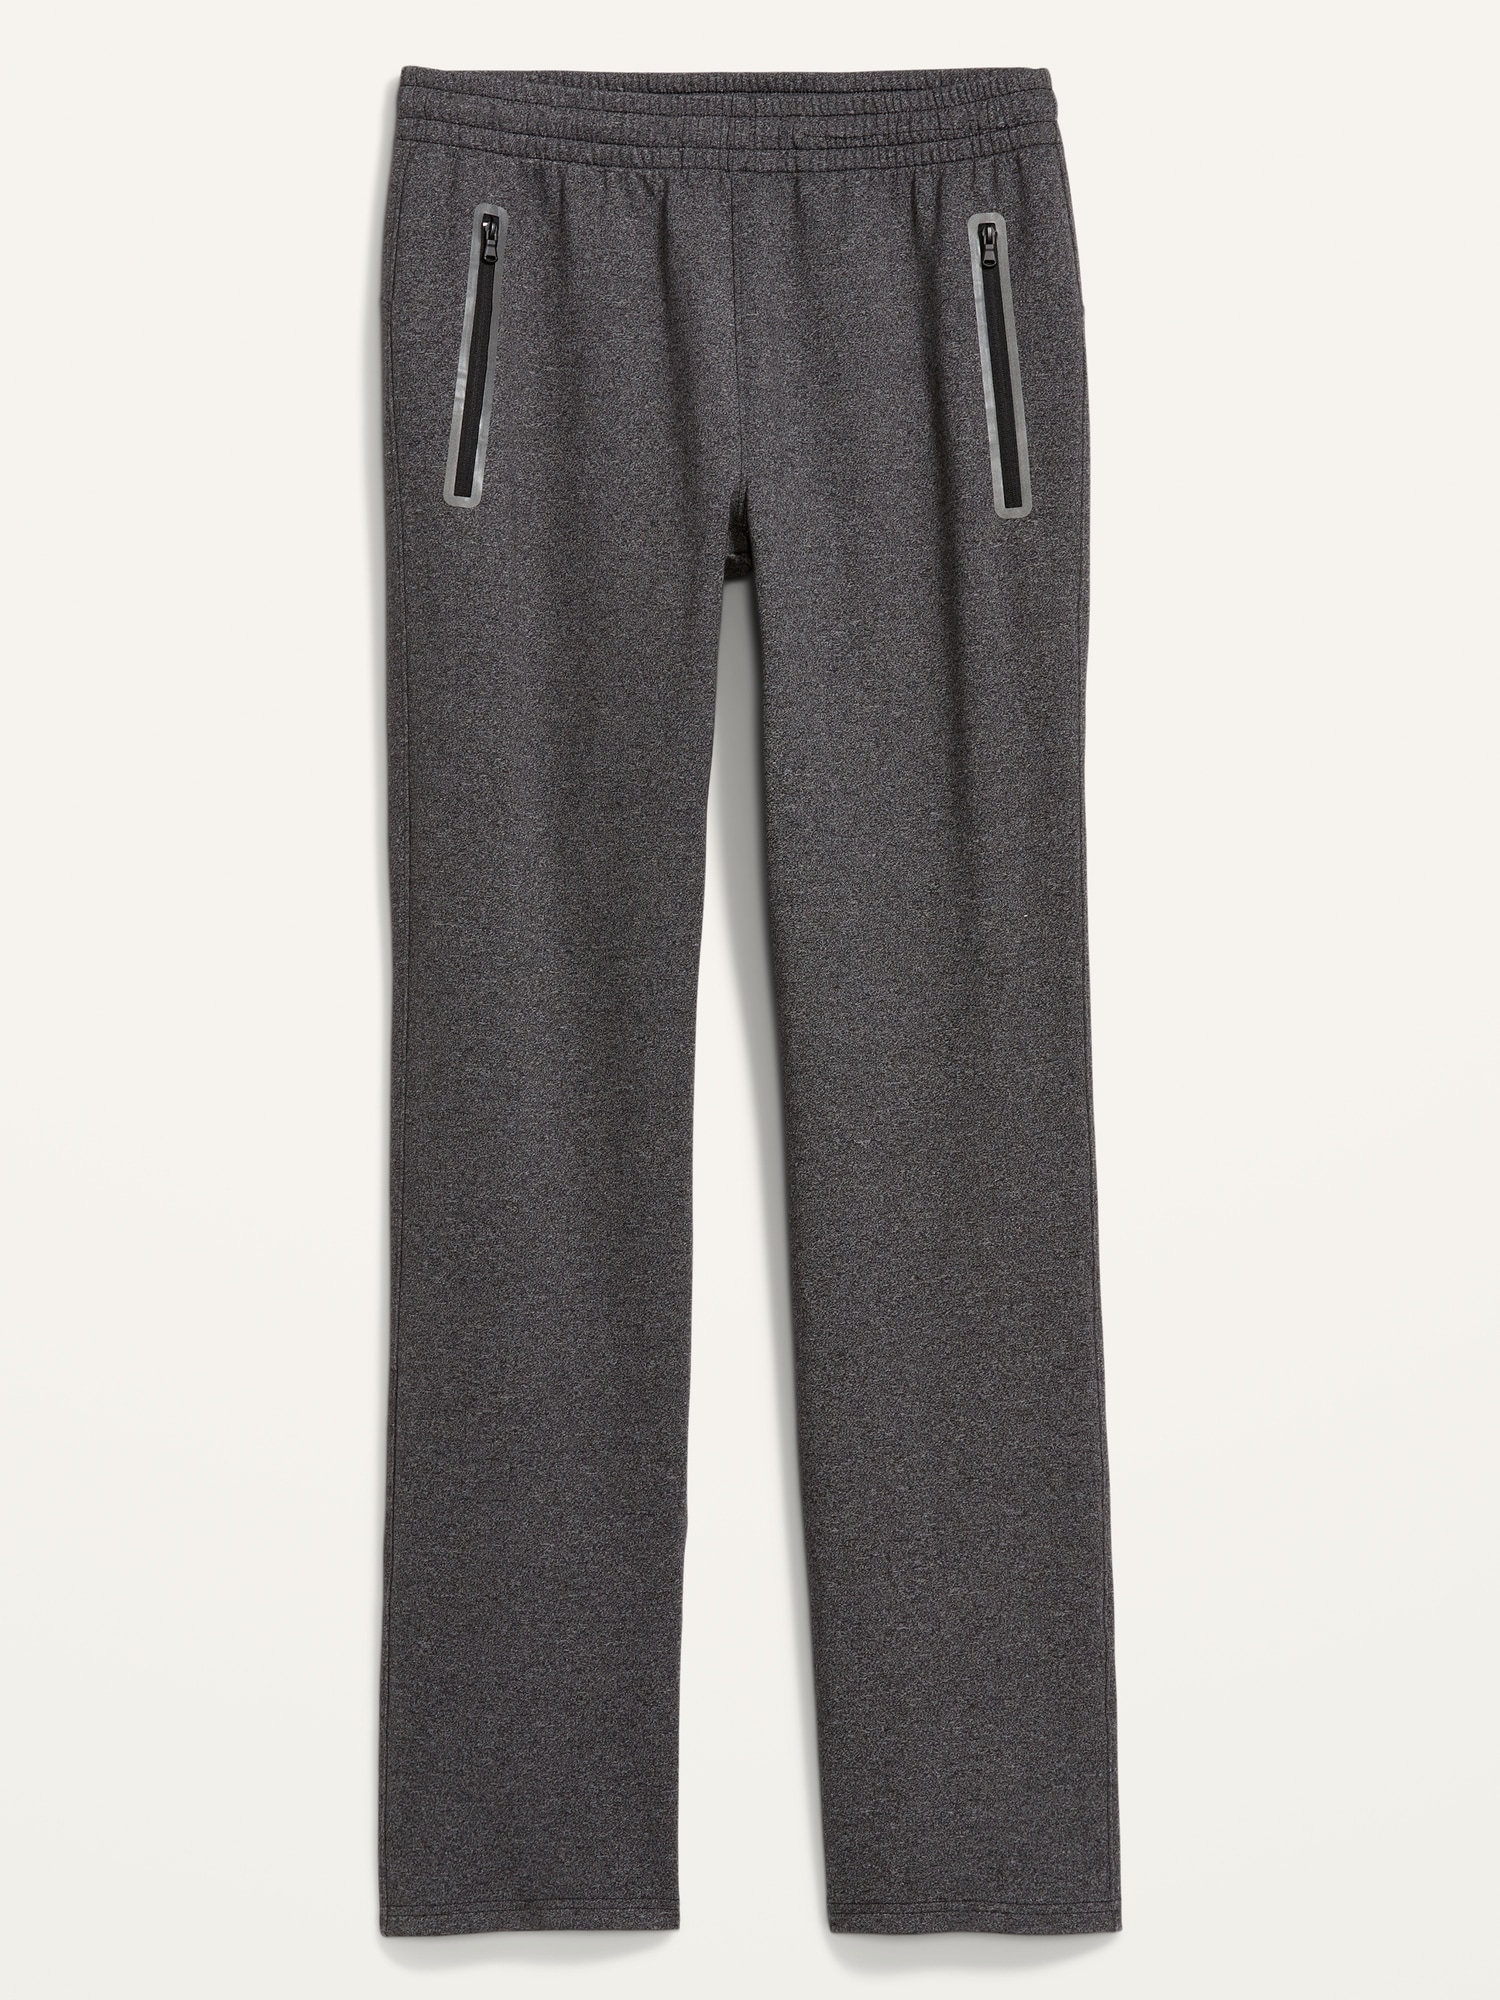 NWT Old Navy Dynamic Fleece Tapered Sweatpants for Men Light Gray